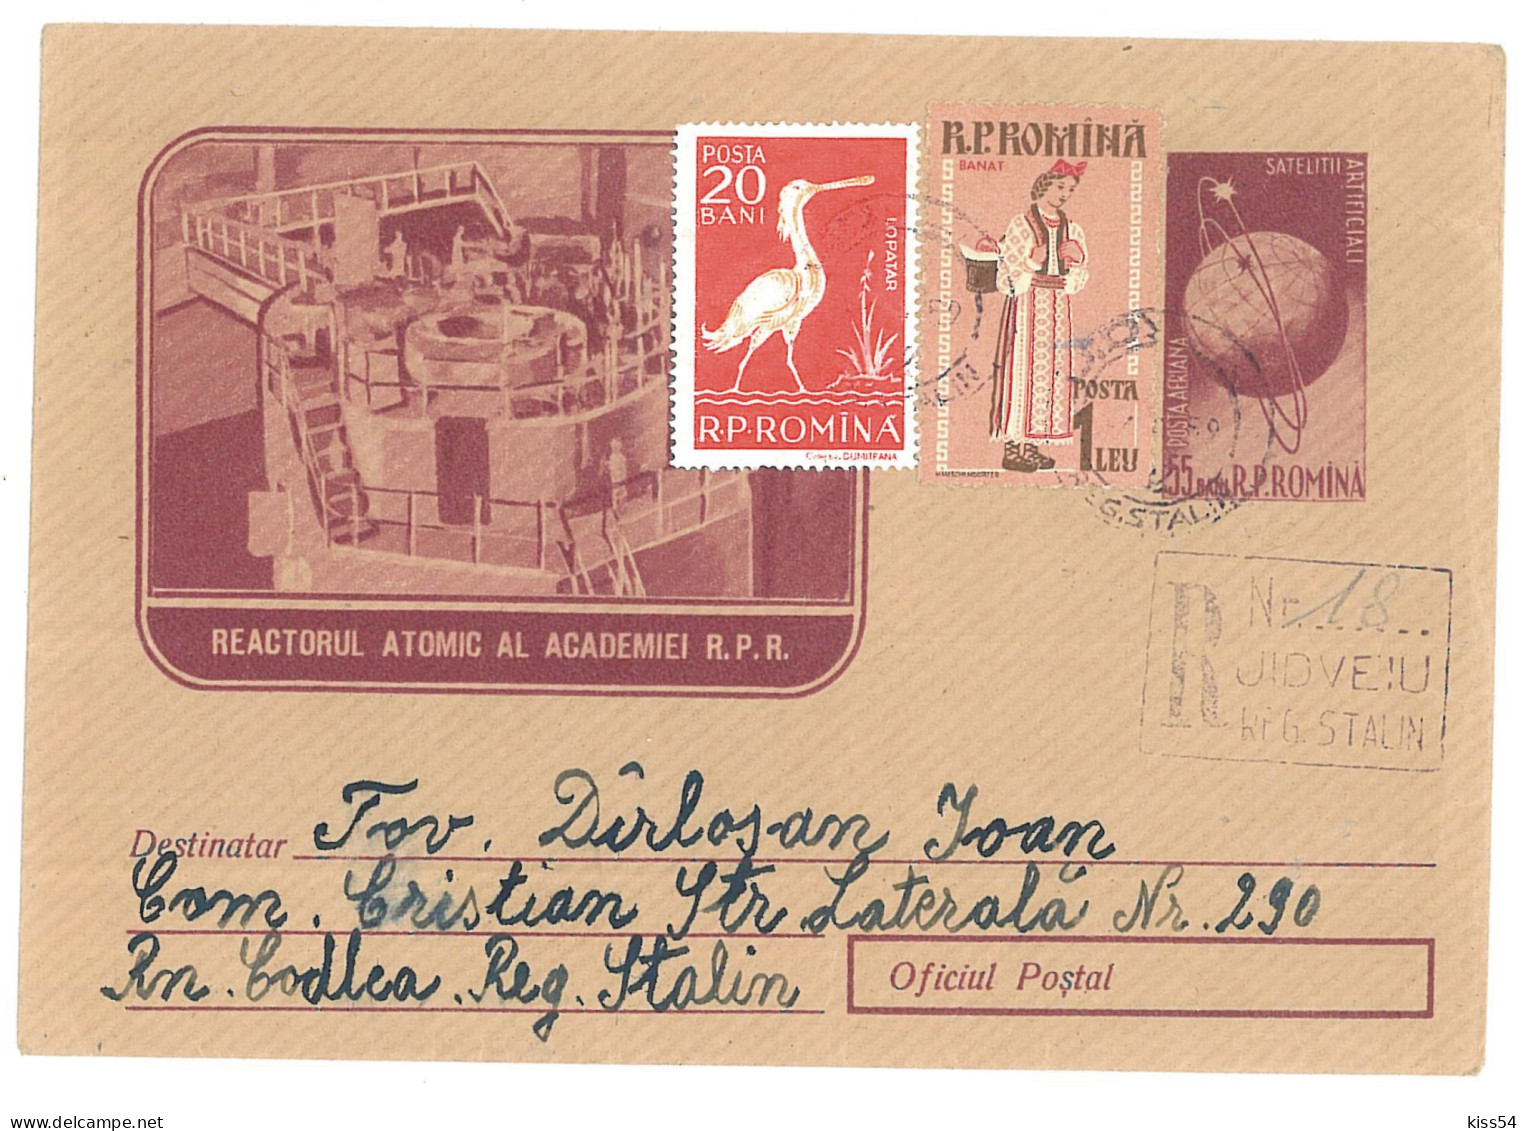 IP 58 A - 0119d-b ENERGY, Atomic Reactor, Romania - REGISTERED Stationery - Used - 1958 - Atomo